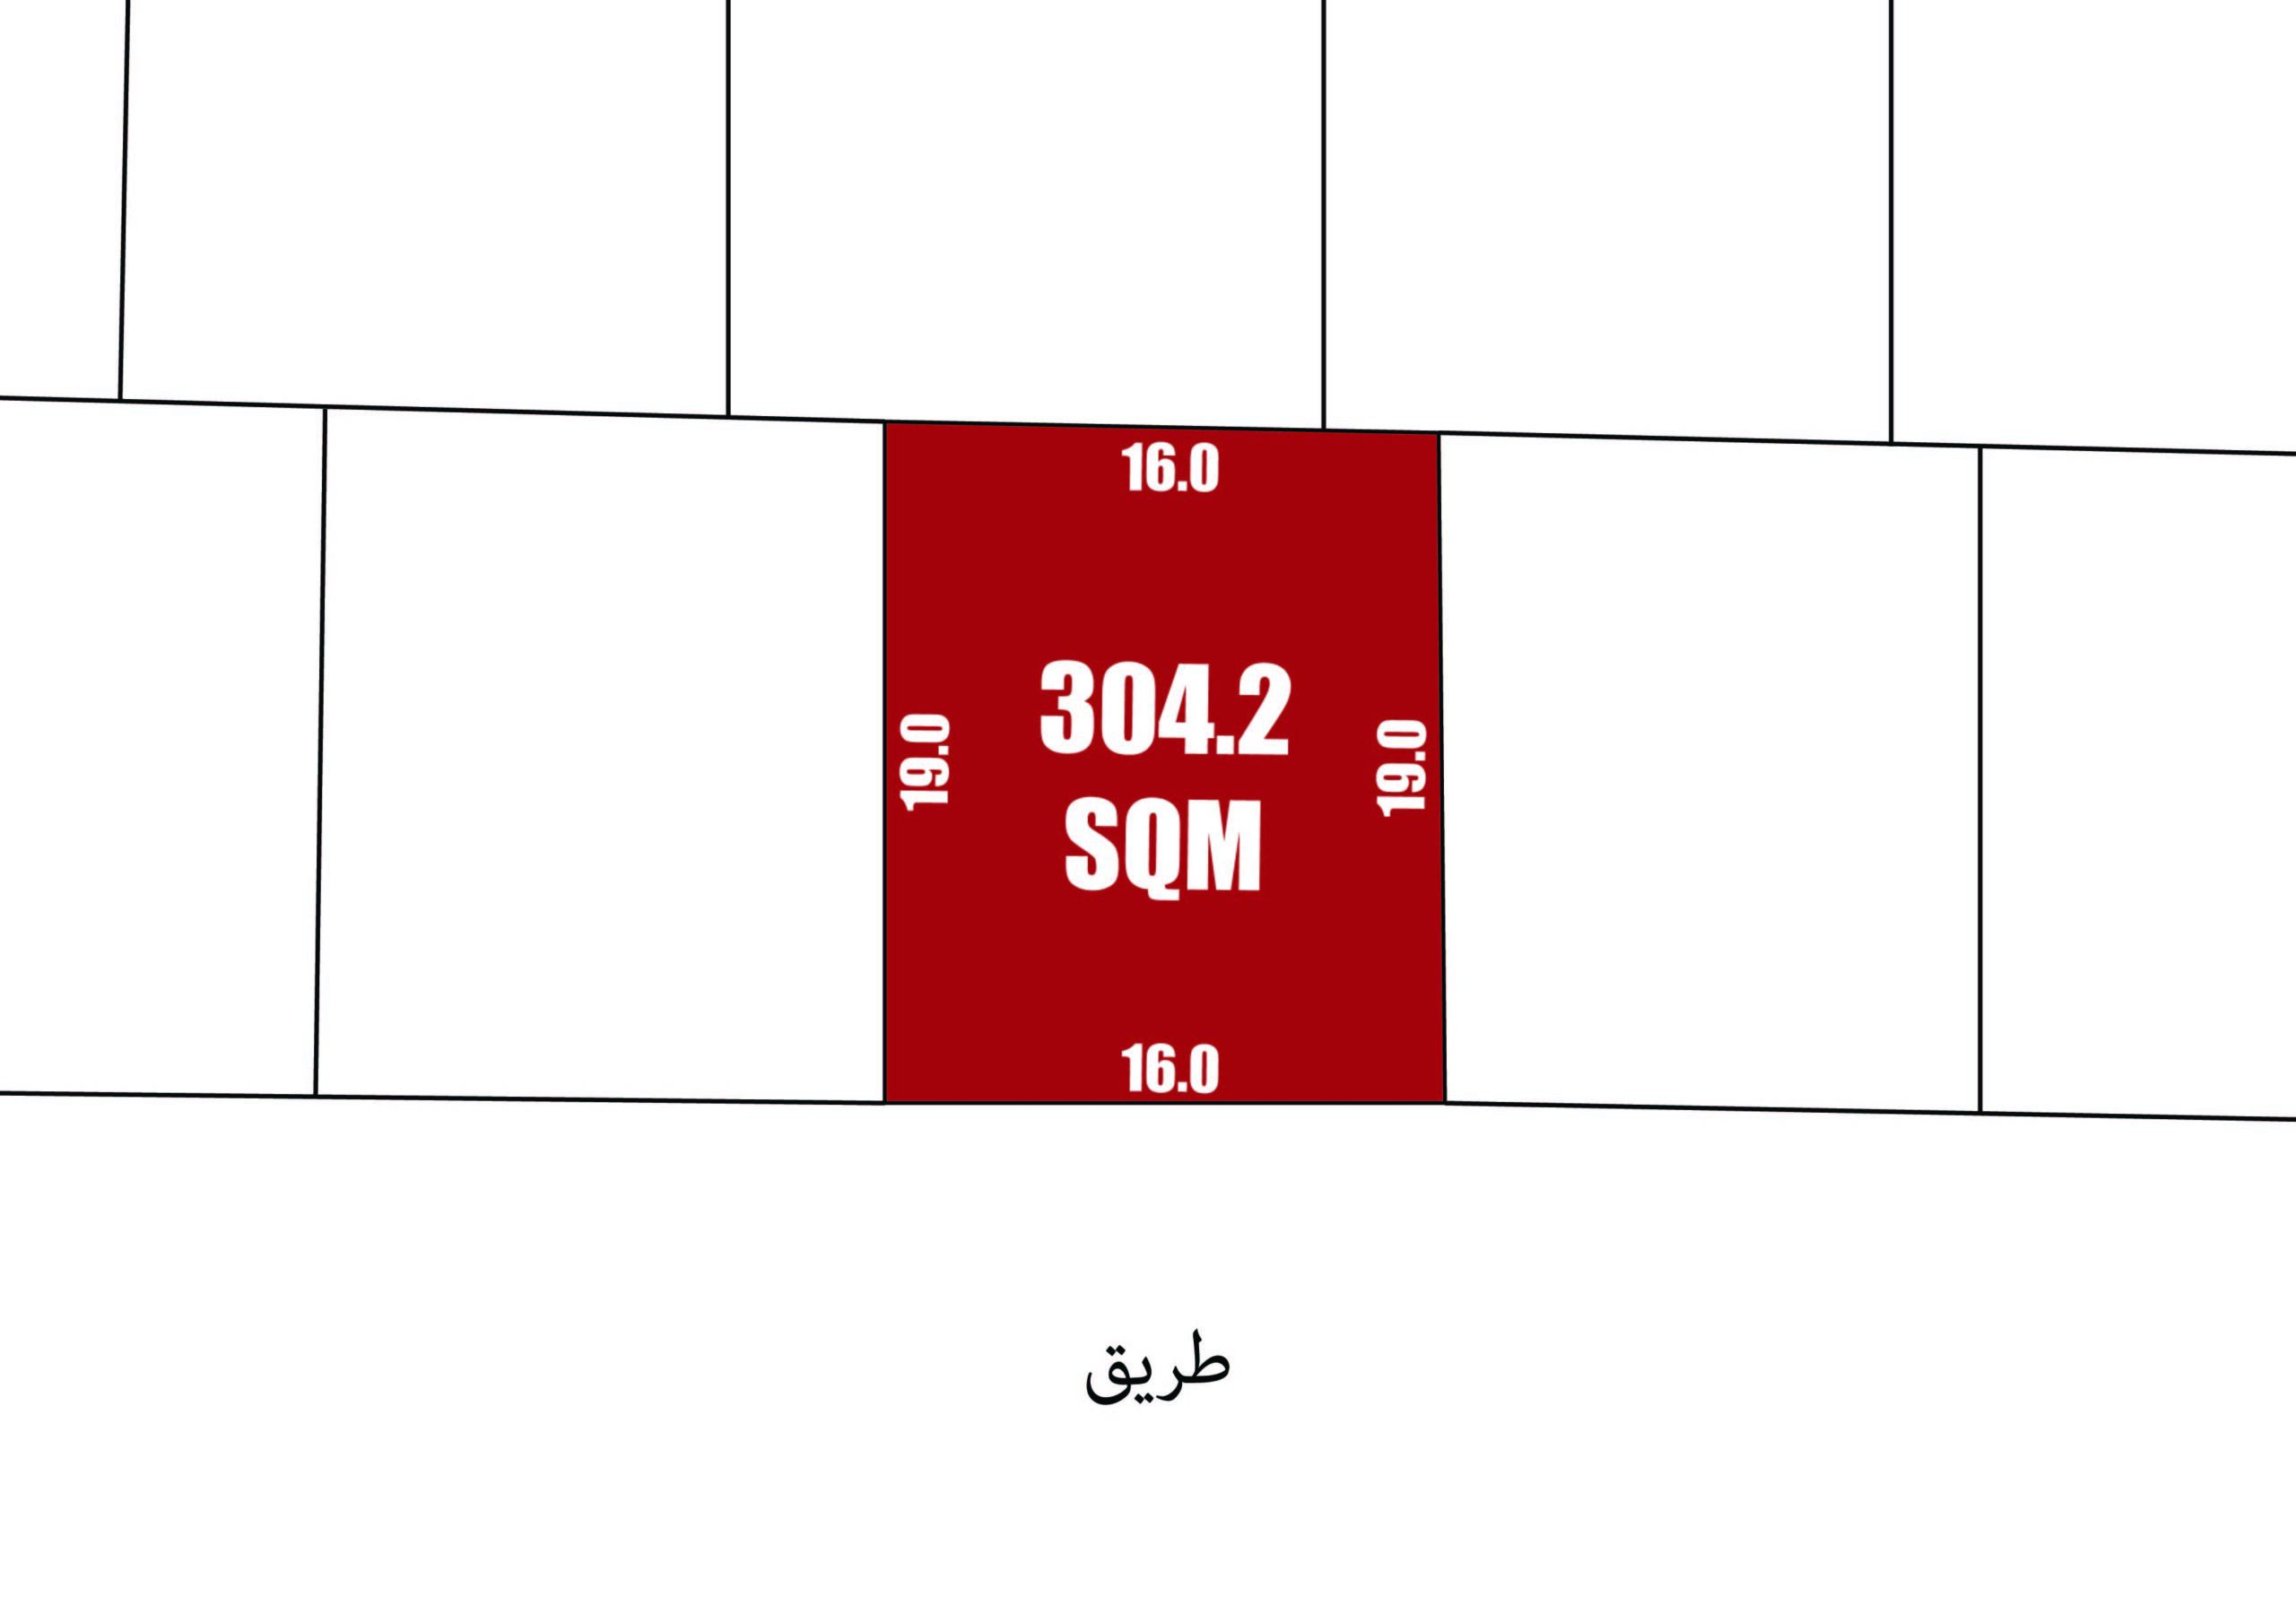 RA Land for Sale in Galali | 304.2 SQM